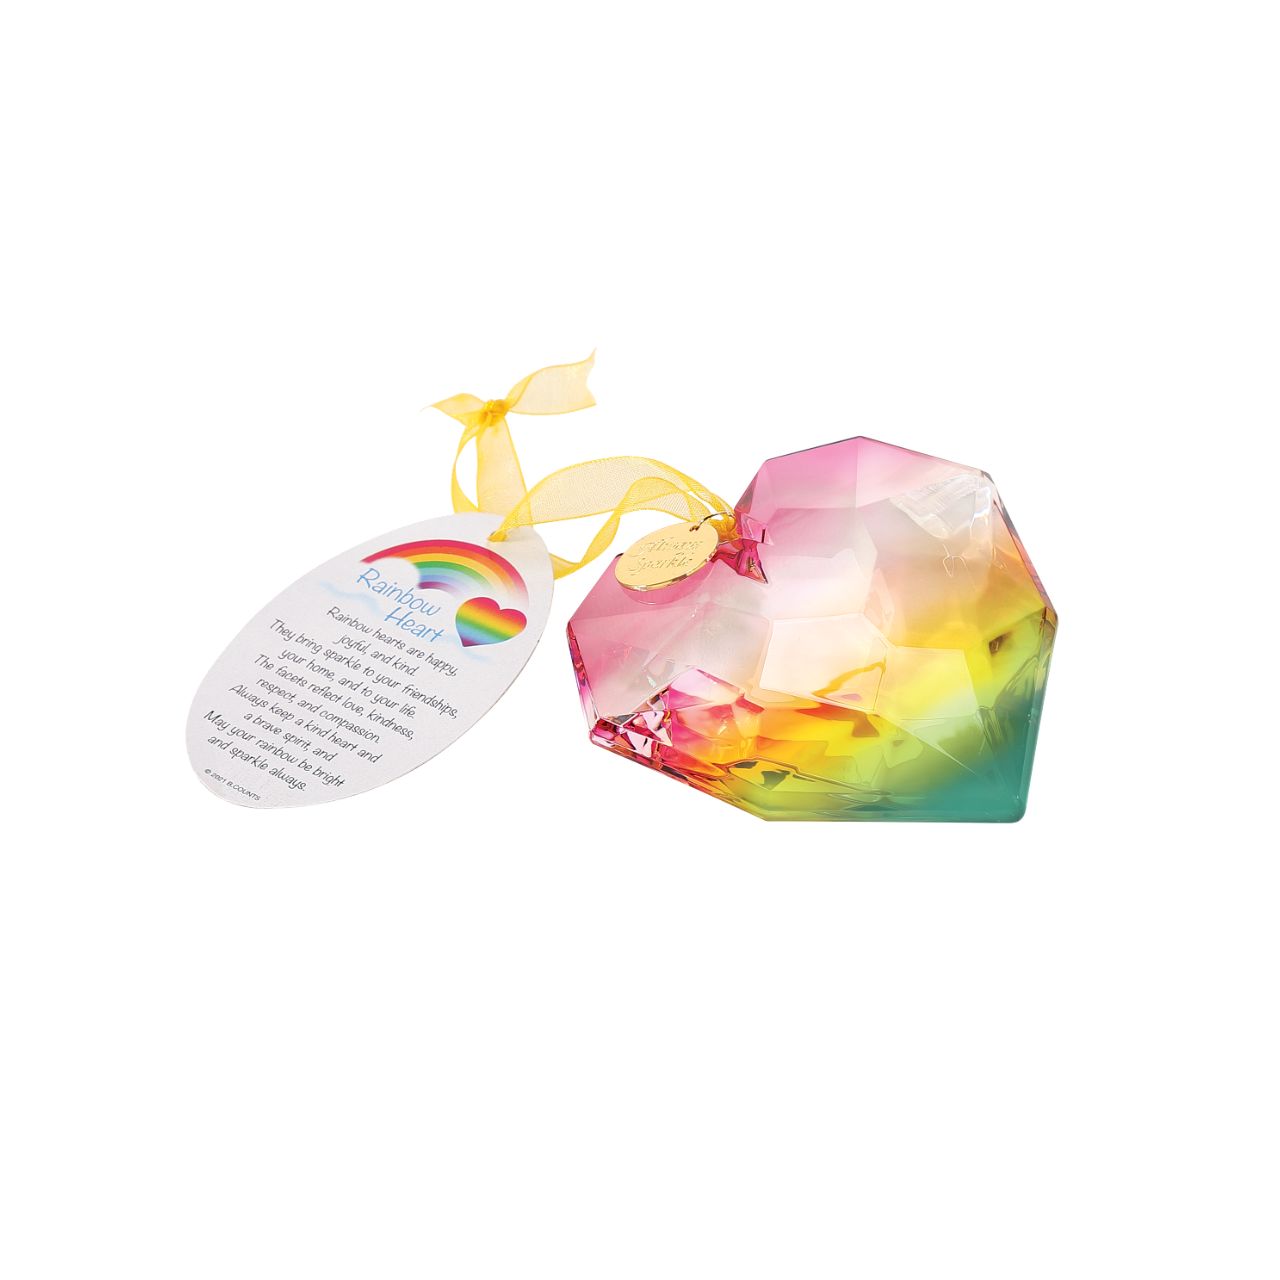 Suncatcher Rainbow Acrylic Heart Hanging Ornament  The rainbow acrylic heart comes in two multi-coloured versions. Each are hung on a coloured organza ribbon and feature a golden sentiment token. A poem also accompanies each heart. Designs are assorted.